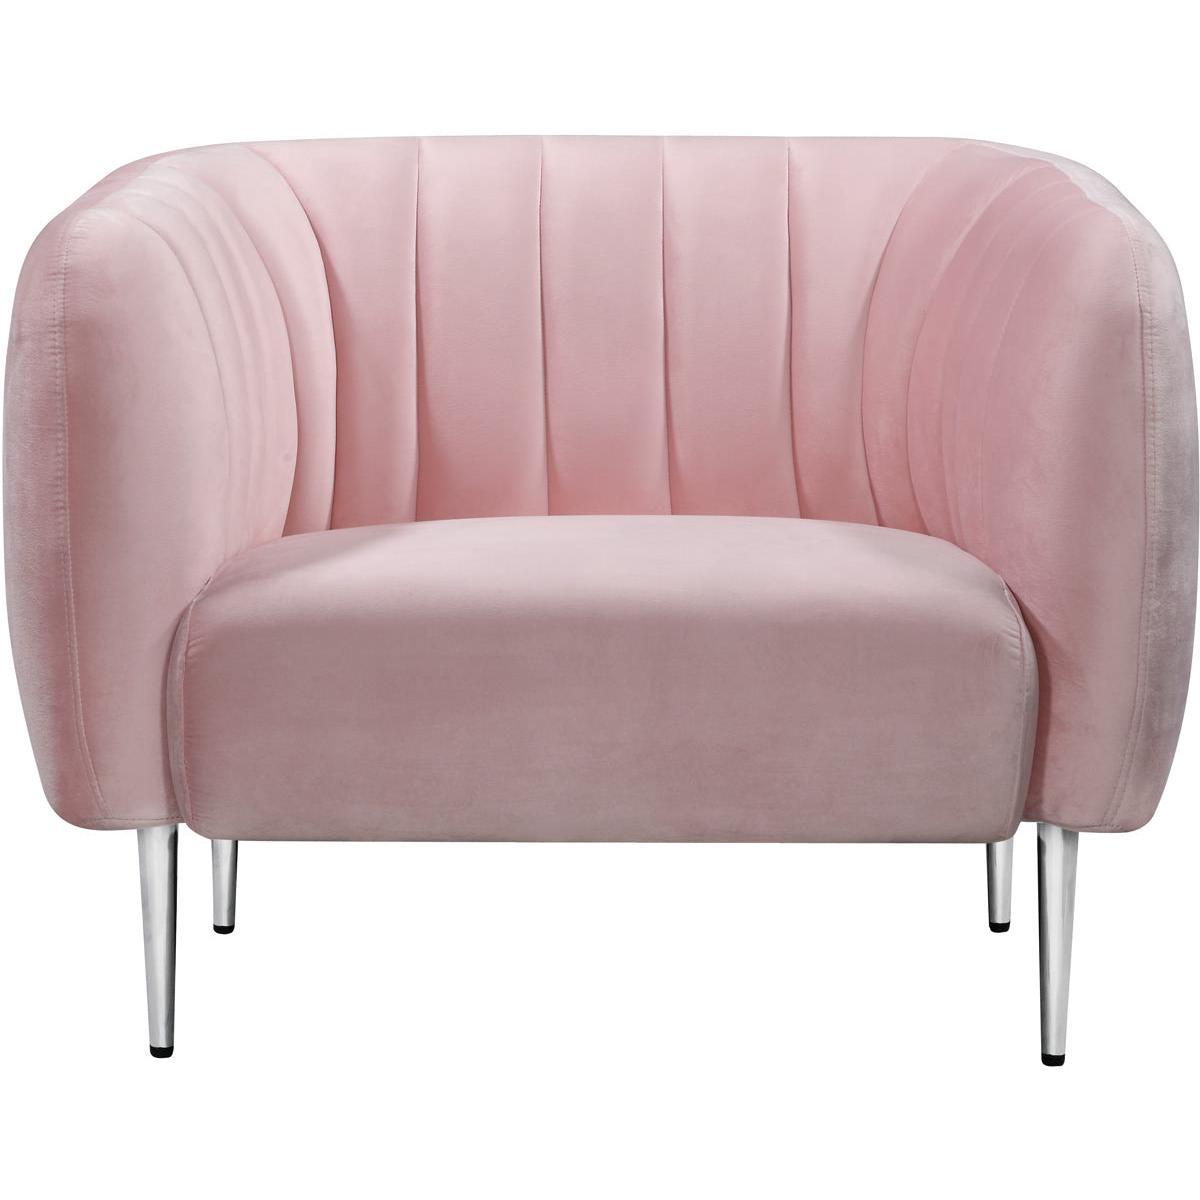 Meridian Furniture Willow Pink Velvet ChairMeridian Furniture - Chair - Minimal And Modern - 1